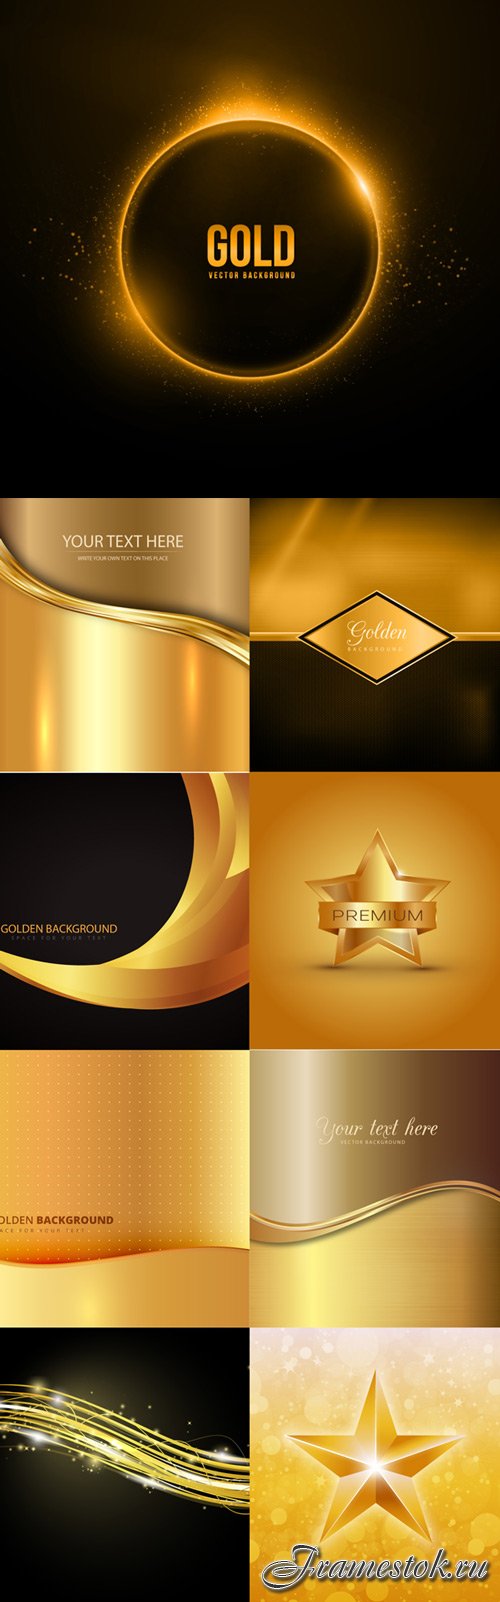 Gold stylish backgrounds vector graphics